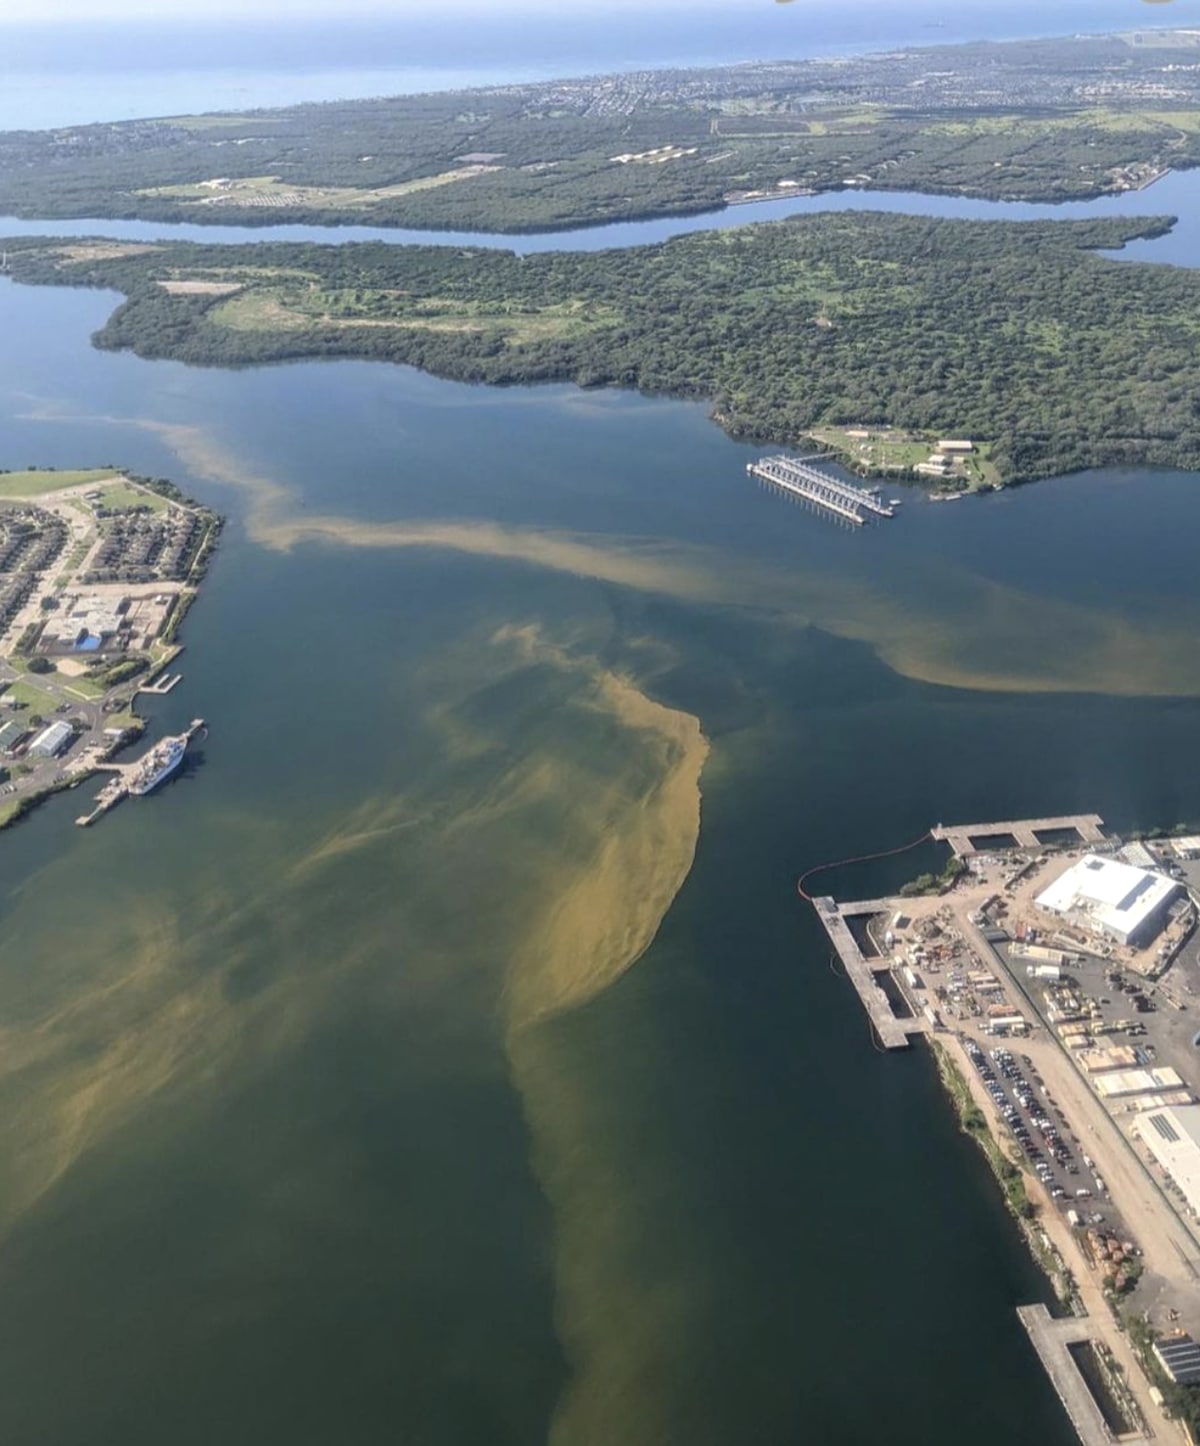 A photograph shows still-contaminated water in Pu'uloa (Pearl Harbor) in January 2022 after the U.S. Navy flushed millions of gallons of water out to sea after first pumping the fuel-contaminated water through treatment filters in affected homes and neighborhoods